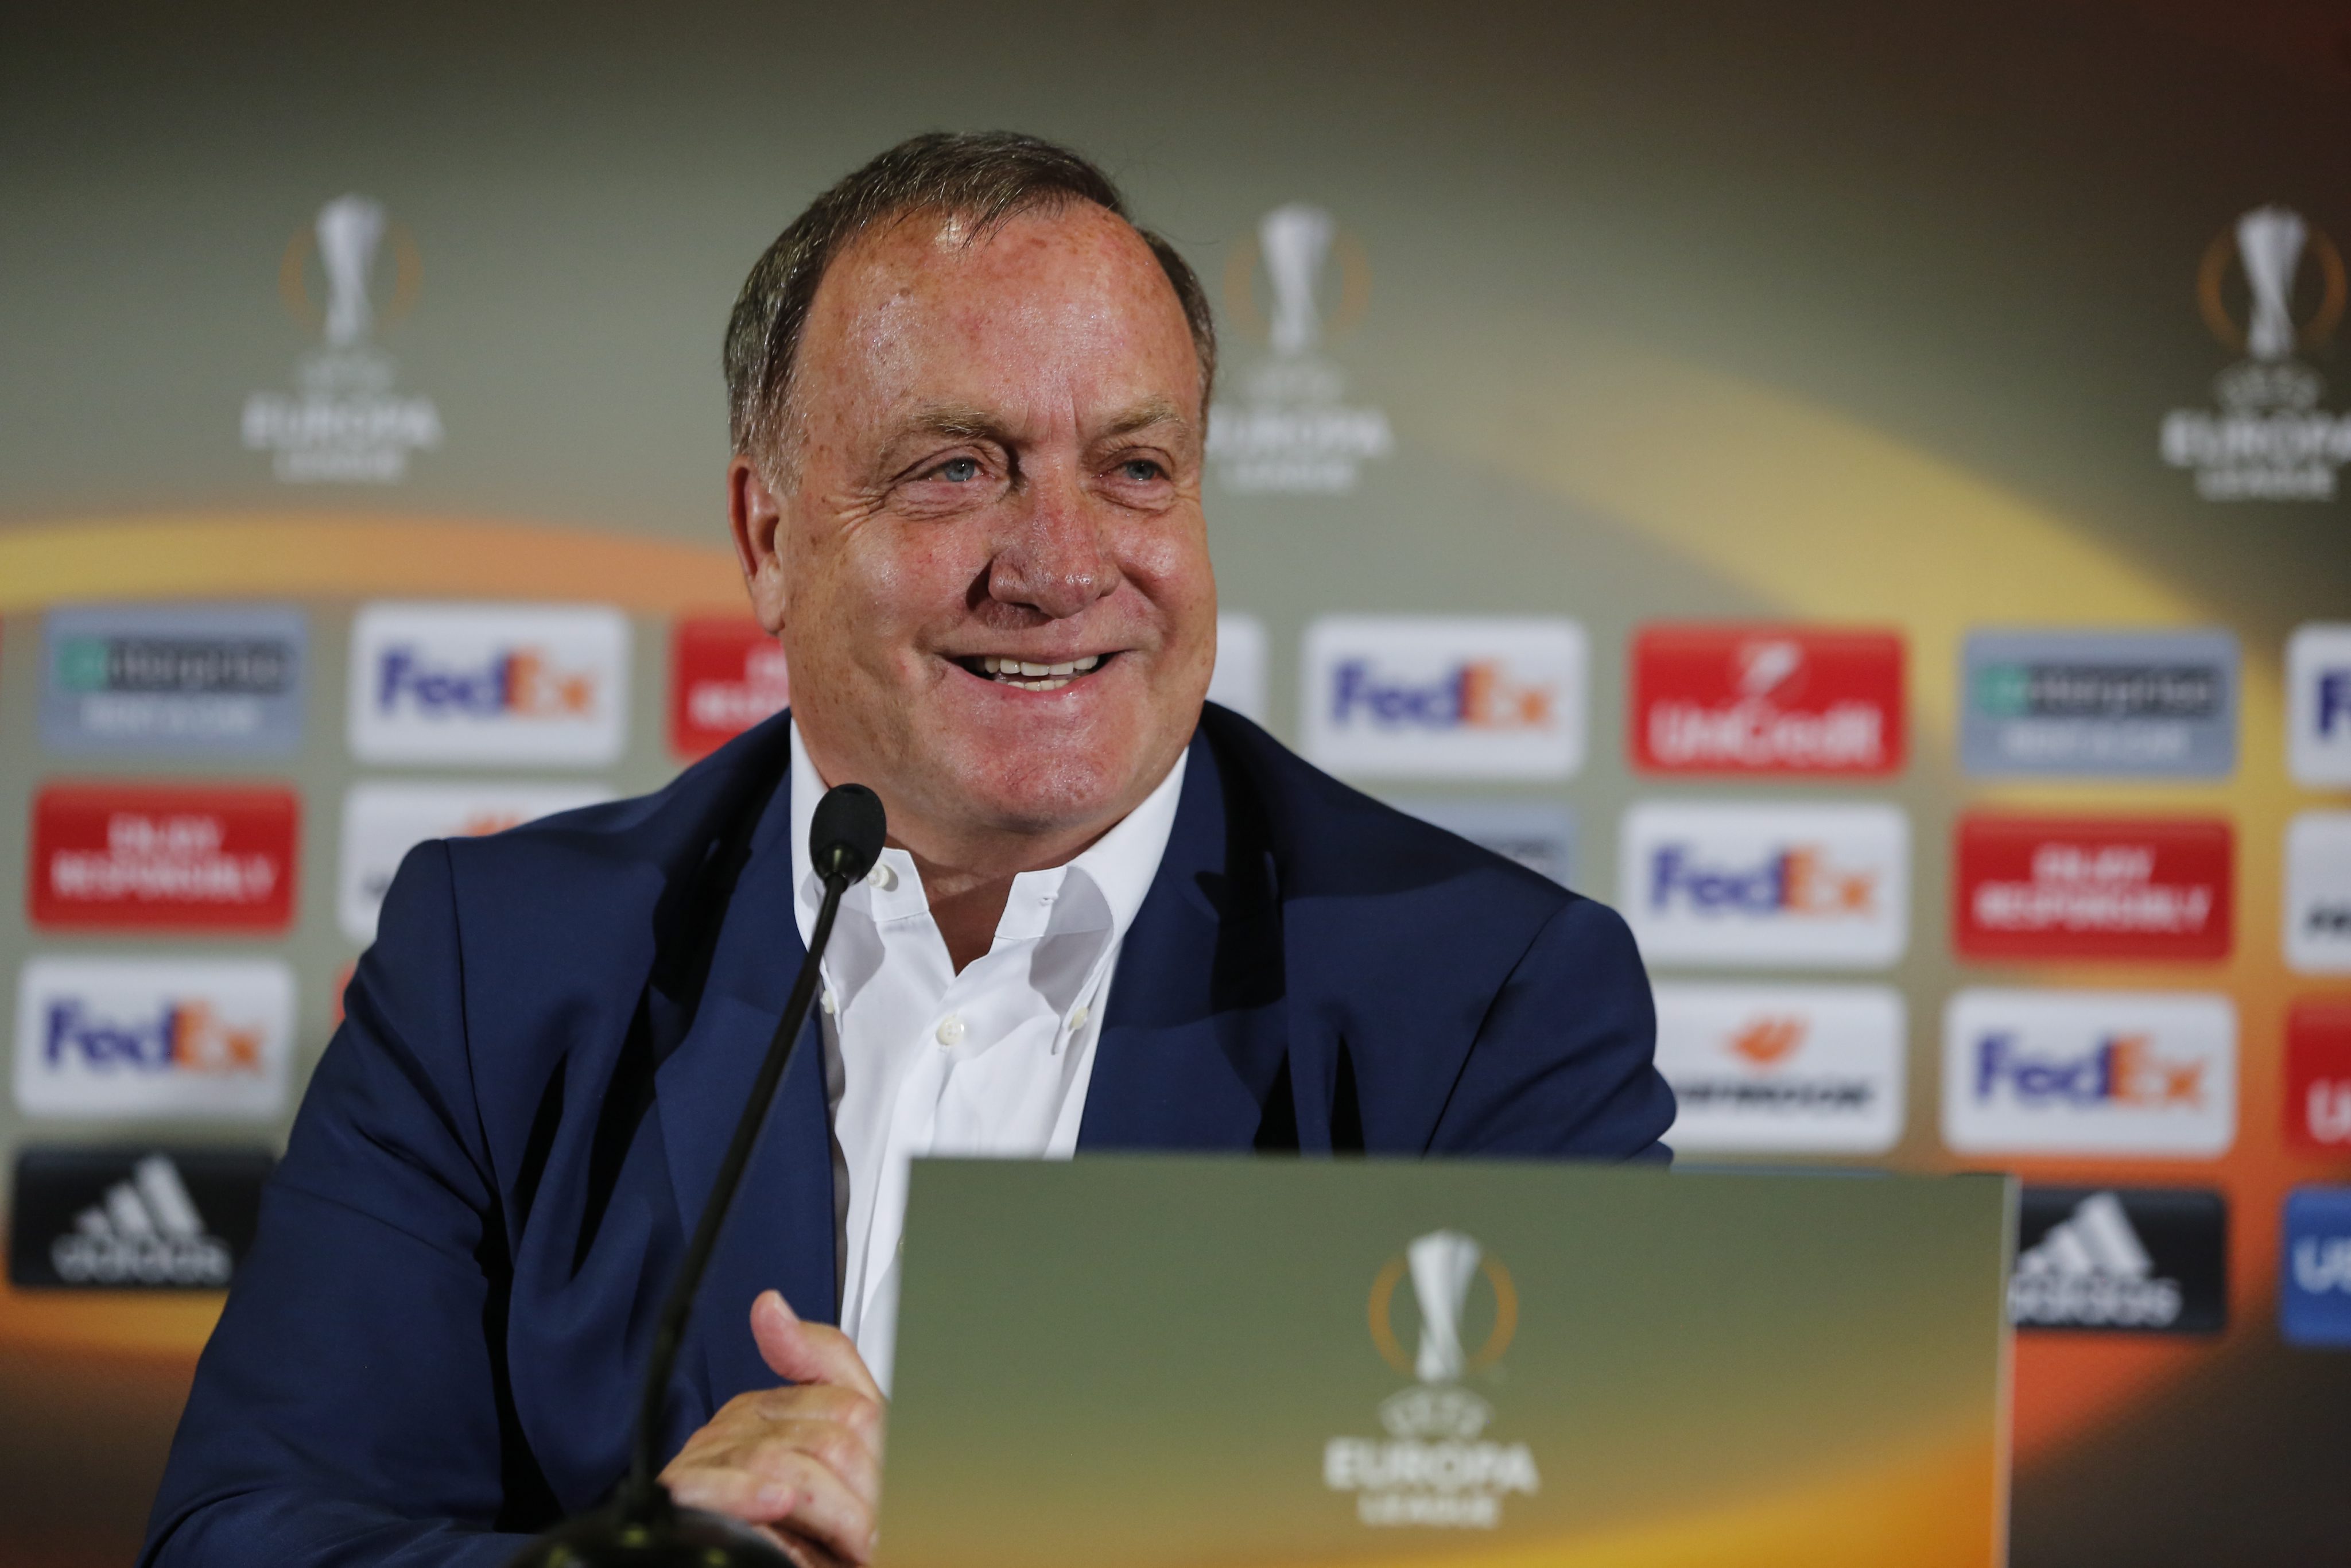 2016-09-28 15:44:04 epa05560071 Fenerbahce Istanbul's Dutch coach Dick Advocaat speaks during a press conference in Istanbul, Turkey, 28 September 2016. Turkey's Fenerbahce Istanbul will play against Holland's Feyenord in an UEFA Europa League group A match in Istanbul, Turkey on 29 September 2016. EPA/CEM TURKEL